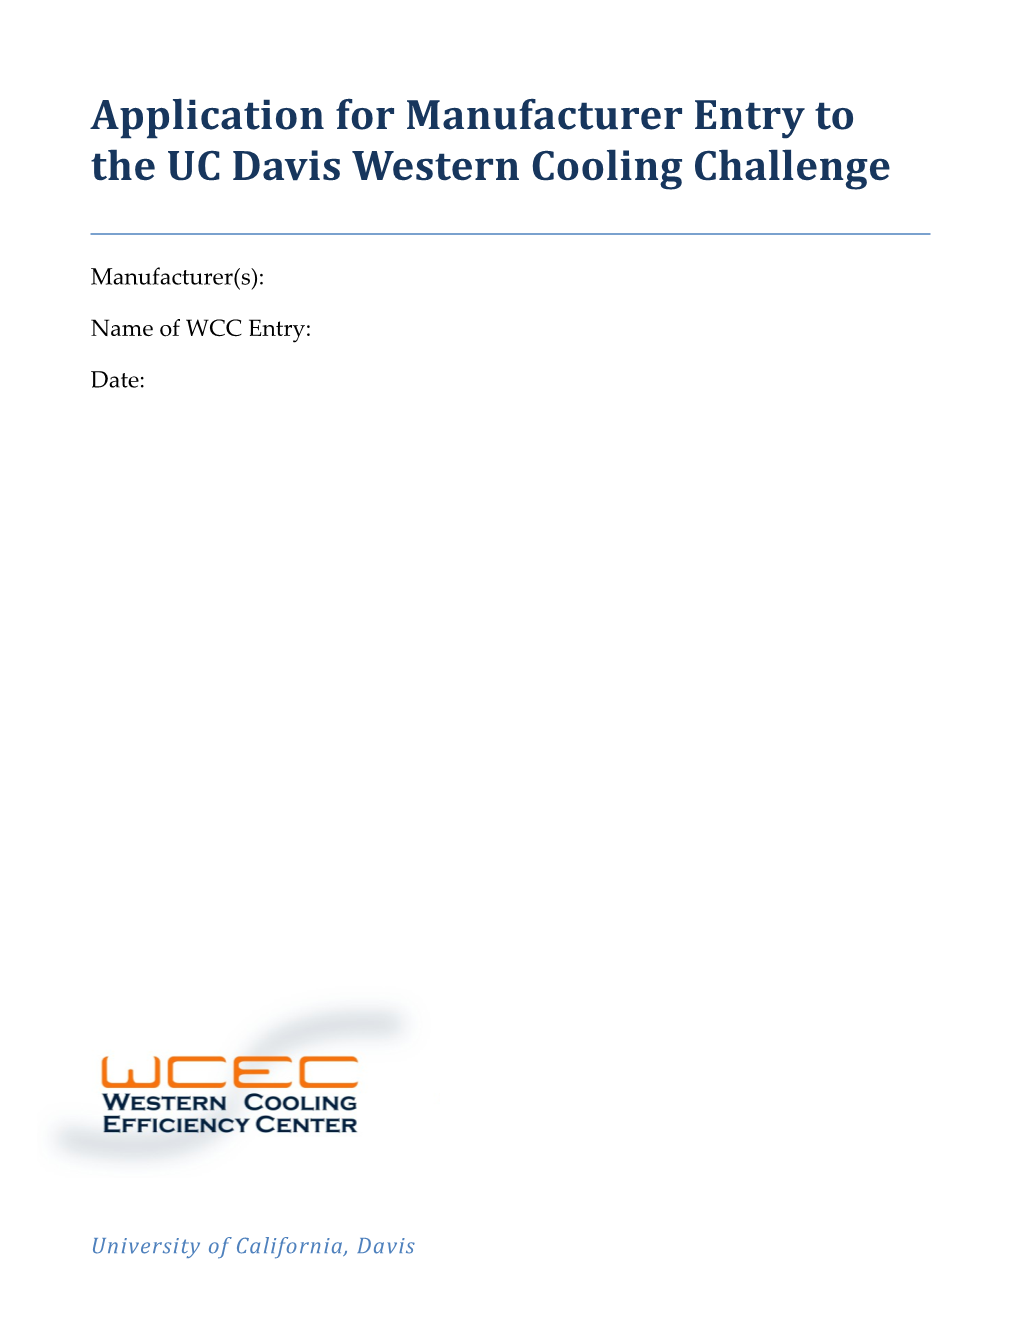 Western Cooling Efficiency Center Water Initiative Outline